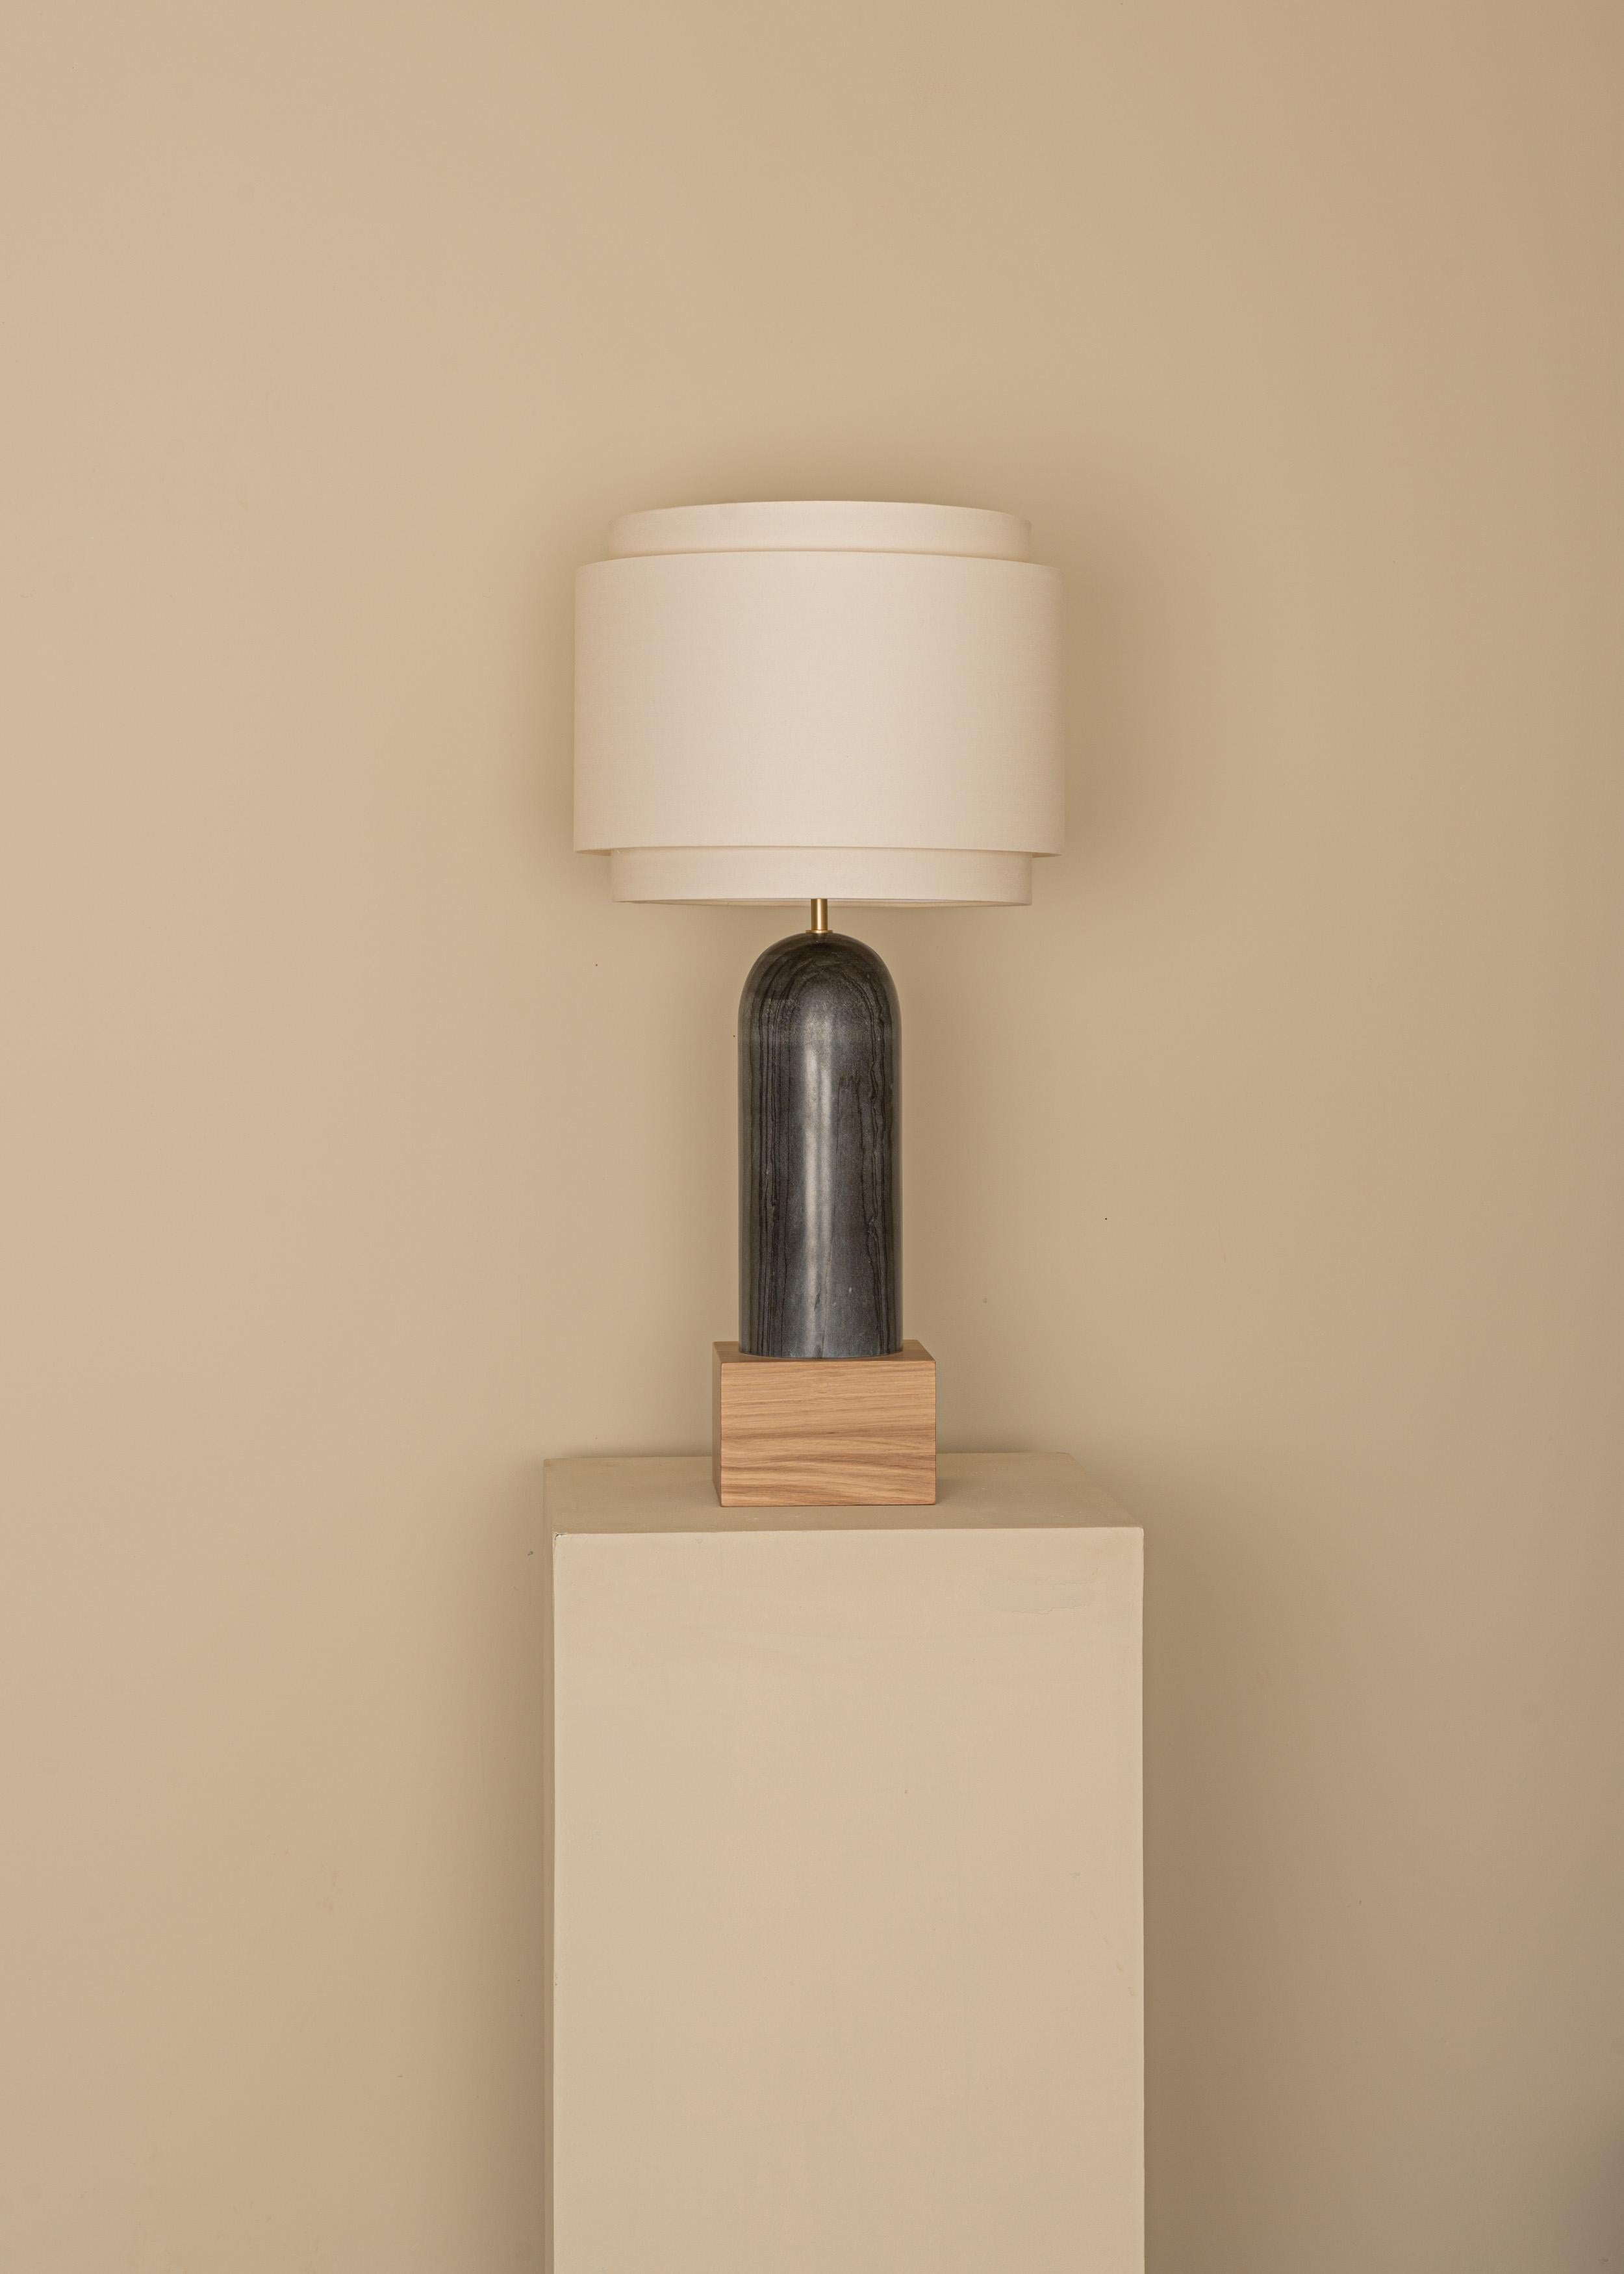 Black Marble And Oak Base Pura Kelo Double Table Lamp by Simone & Marcel
Dimensions: D 35 x W 35 x H 69 cm.
Materials: Brass, cotton, oak and black marble.

Also available in different marble, wood and alabaster options and finishes. Custom options